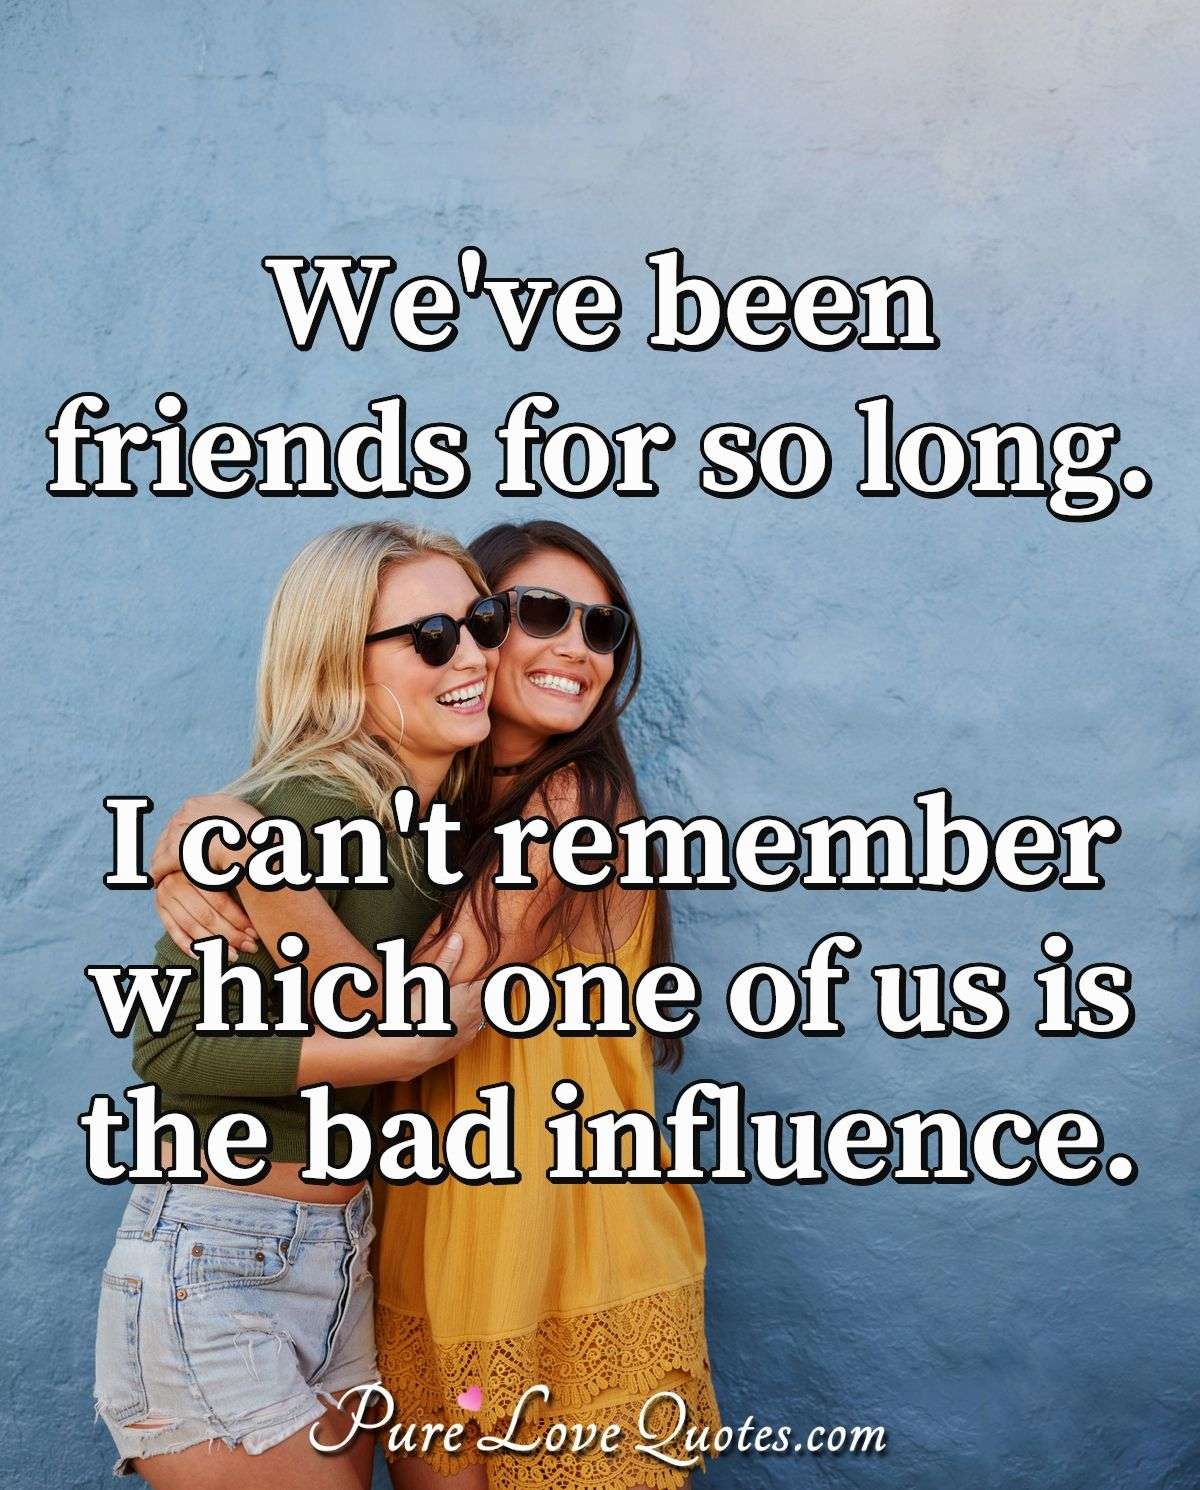 We've been friends for so long. I can't remember which one of us is the bad influence. - Anonymous